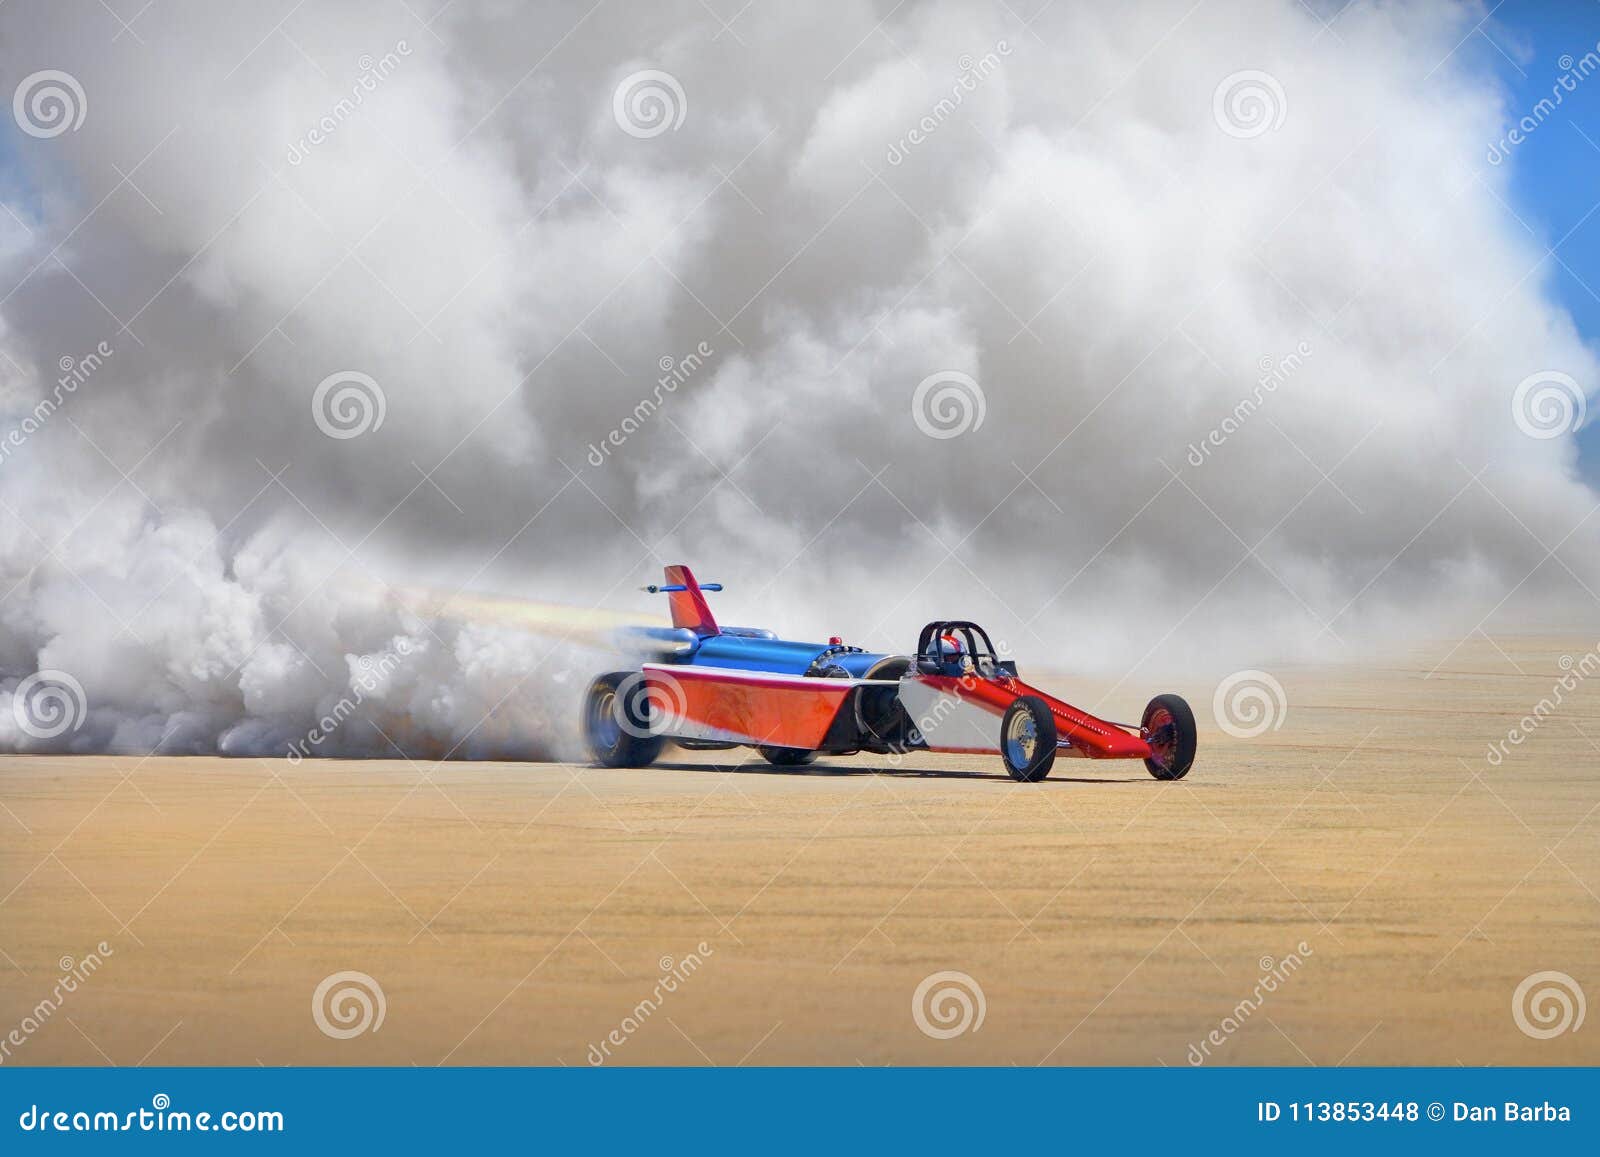 RACE CAR and DRIVER with JET PROPULSION and HEAVY SMOKE on TARMAC Editorial Photo - Image of tarmac, propulsion: